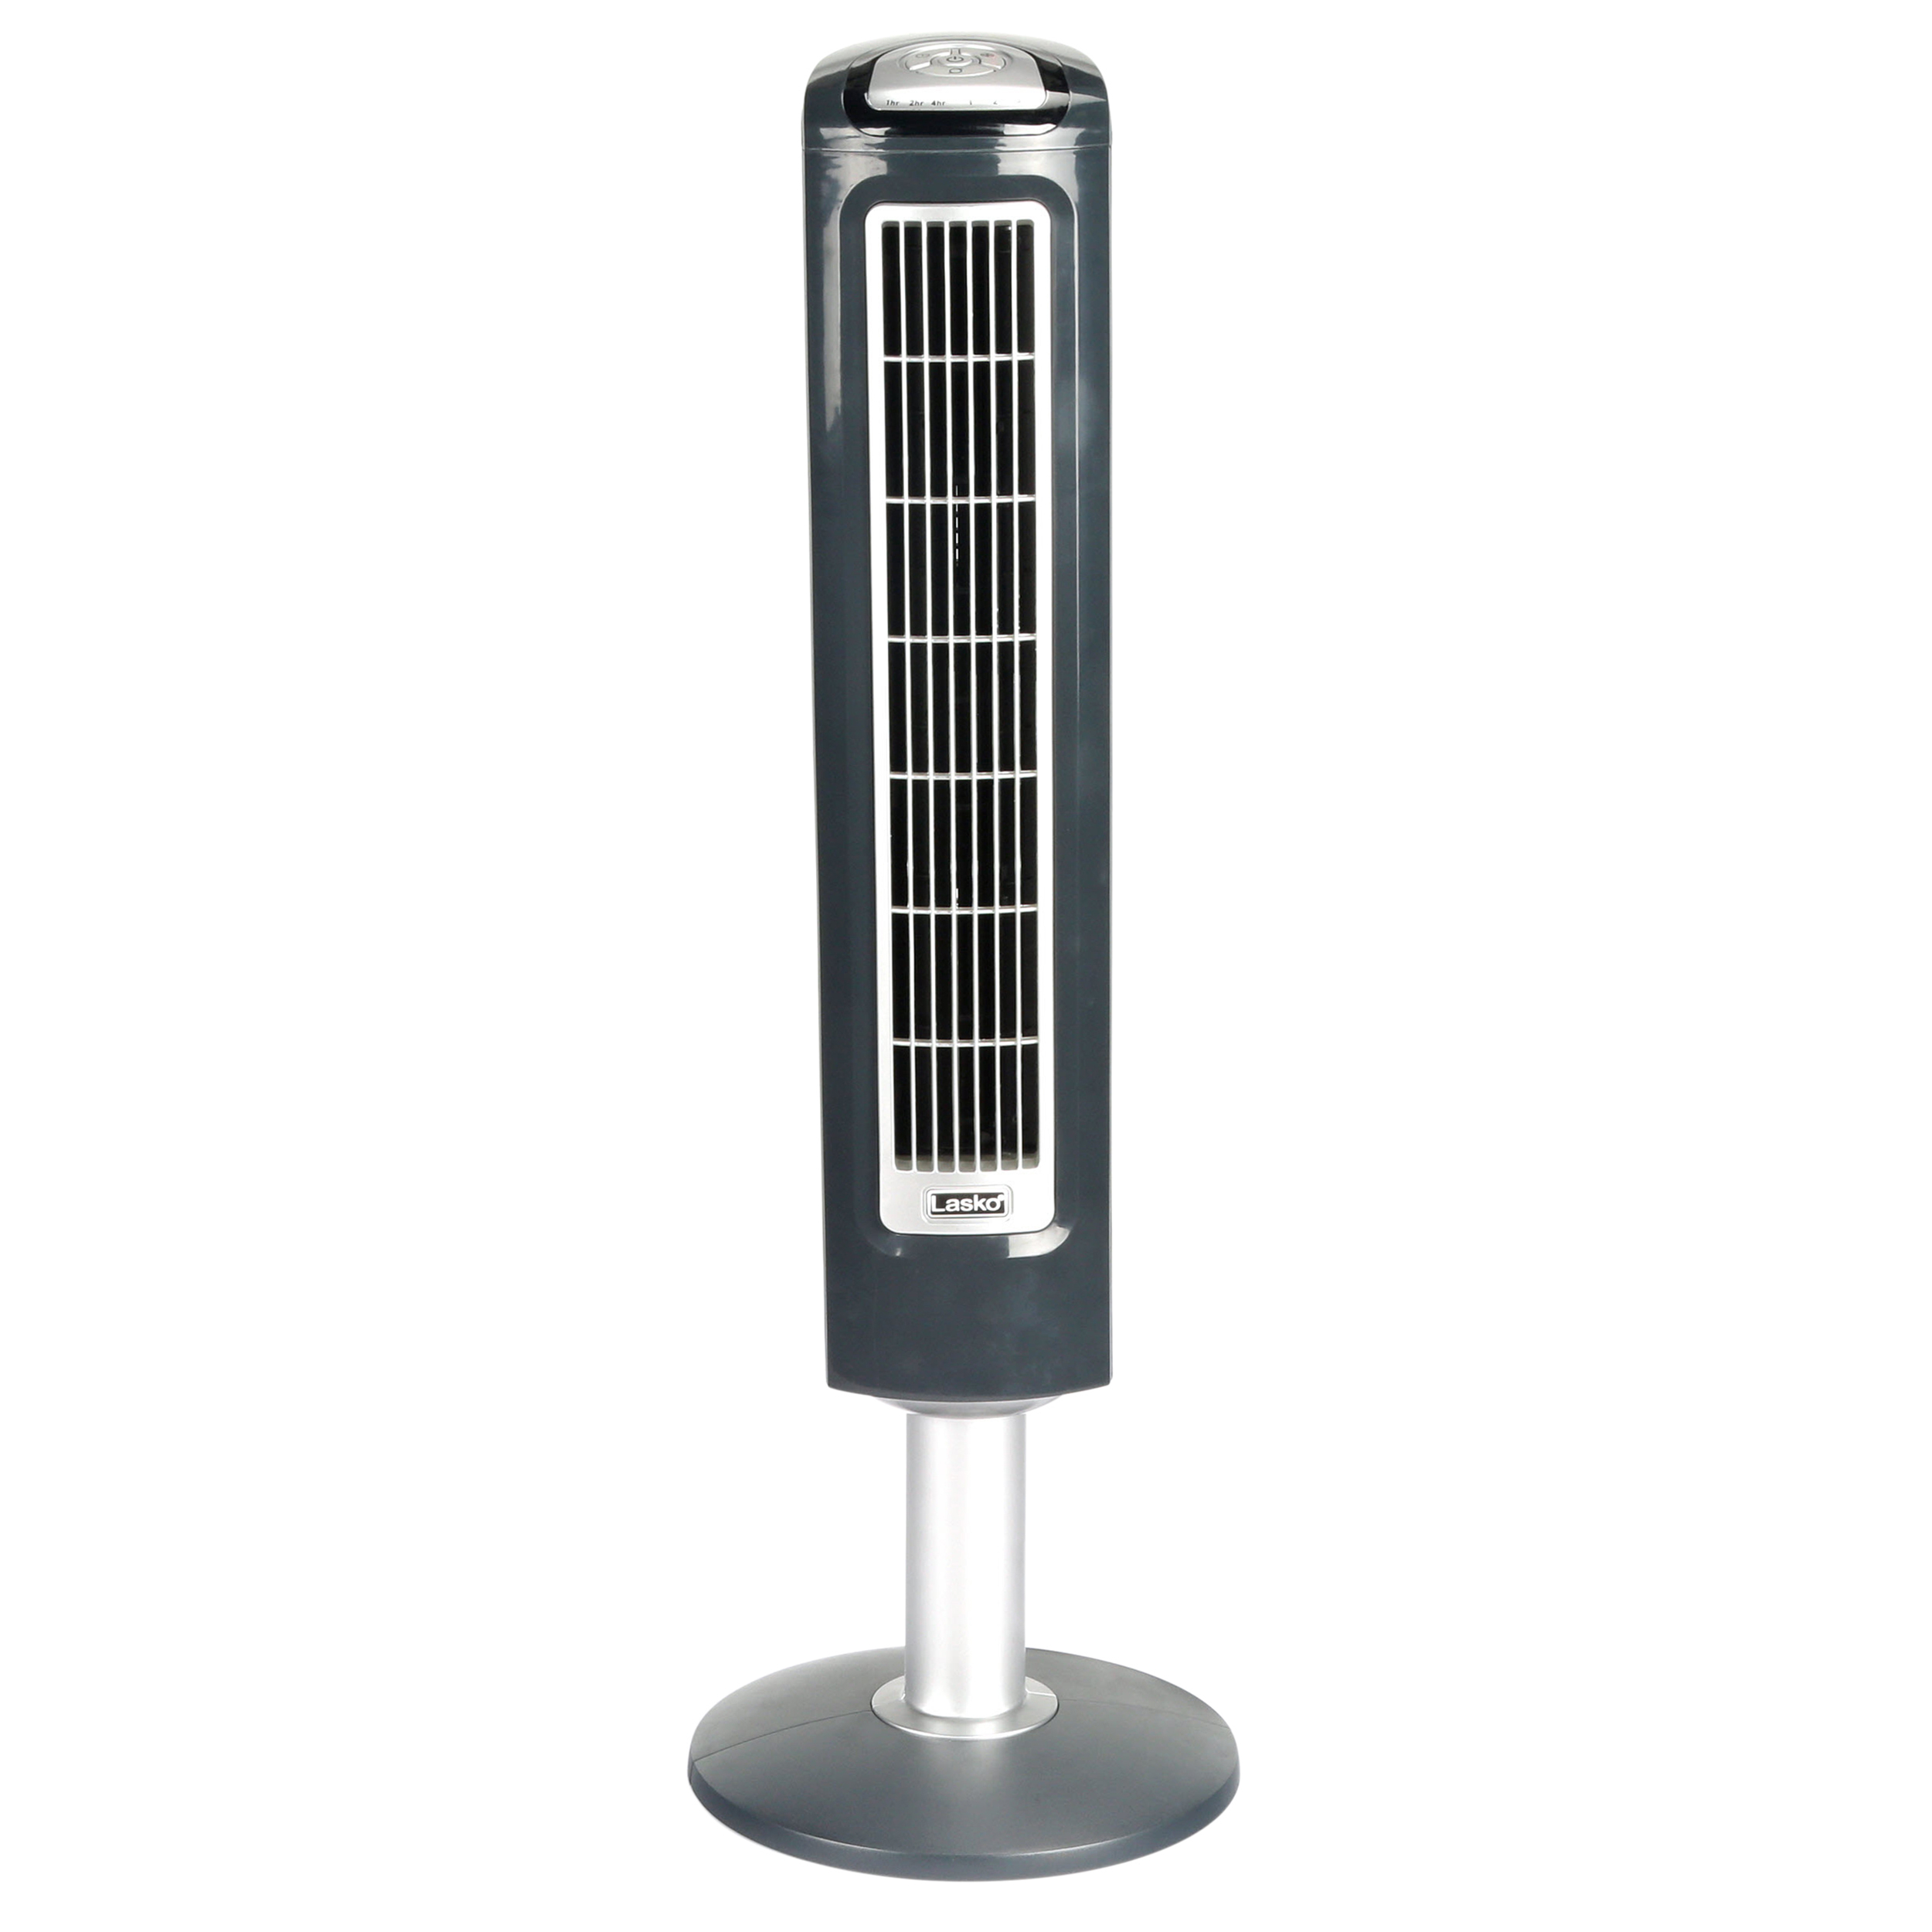 Lasko 38 Wind Tower Oscillating 3 Speed Fan Model 2519 Black With Remote Walmart intended for proportions 2500 X 2500